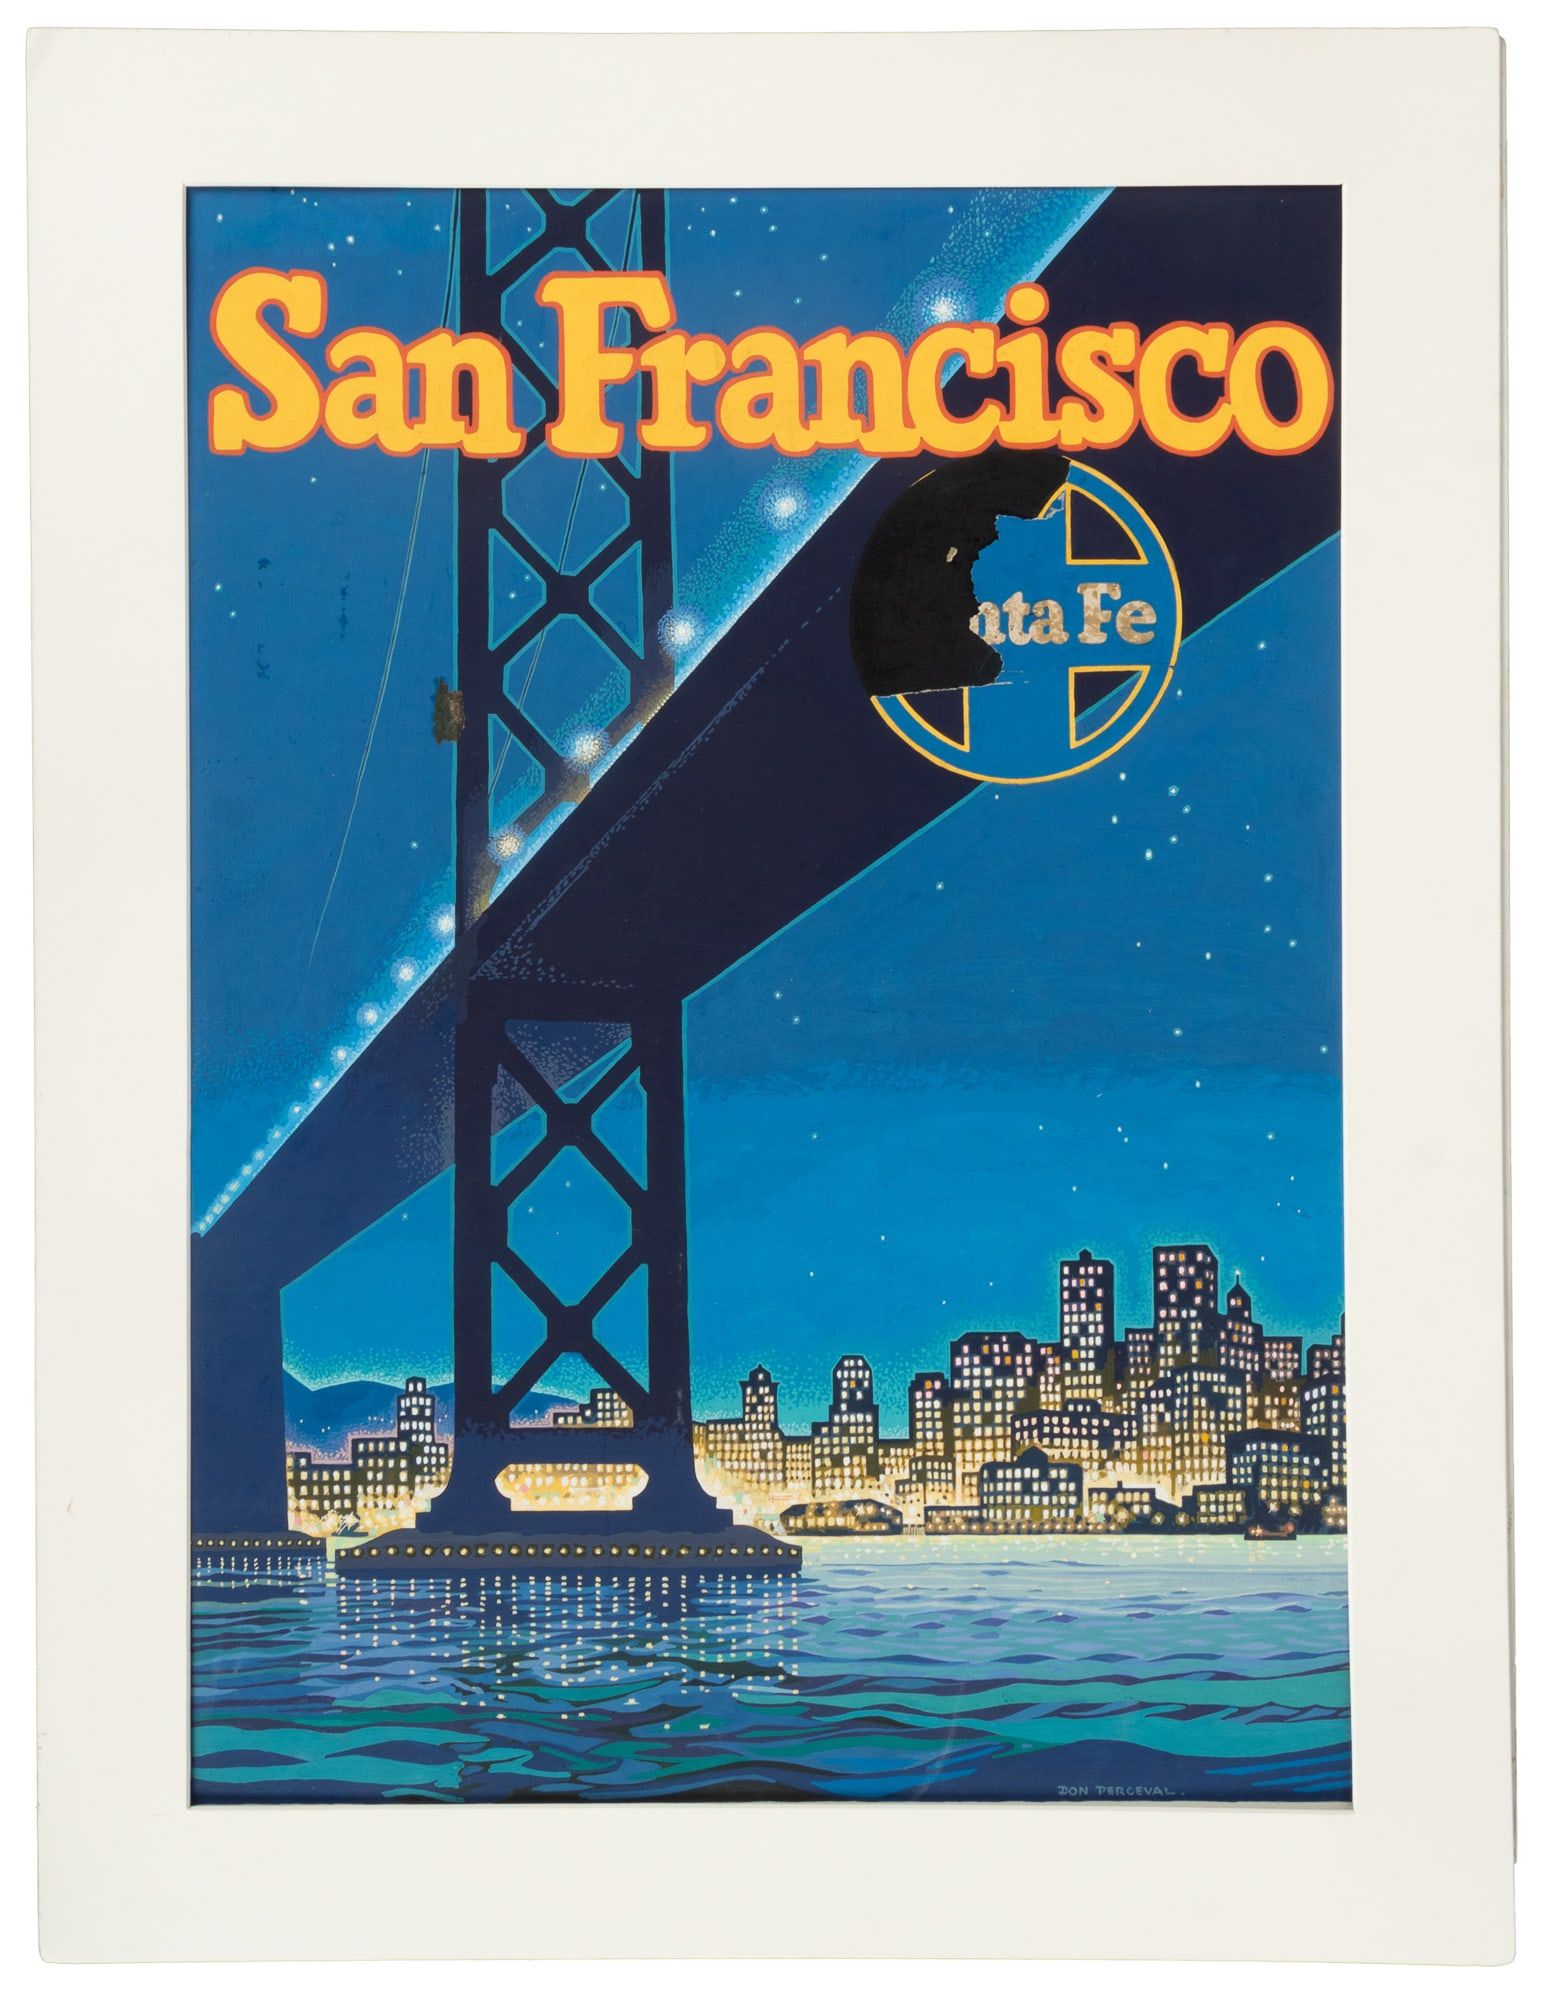 Circa-1950 study for an ATSF San Francisco poster by Don Louis Perceval, estimated at $3,000-$5,000 at PBA Galleries.